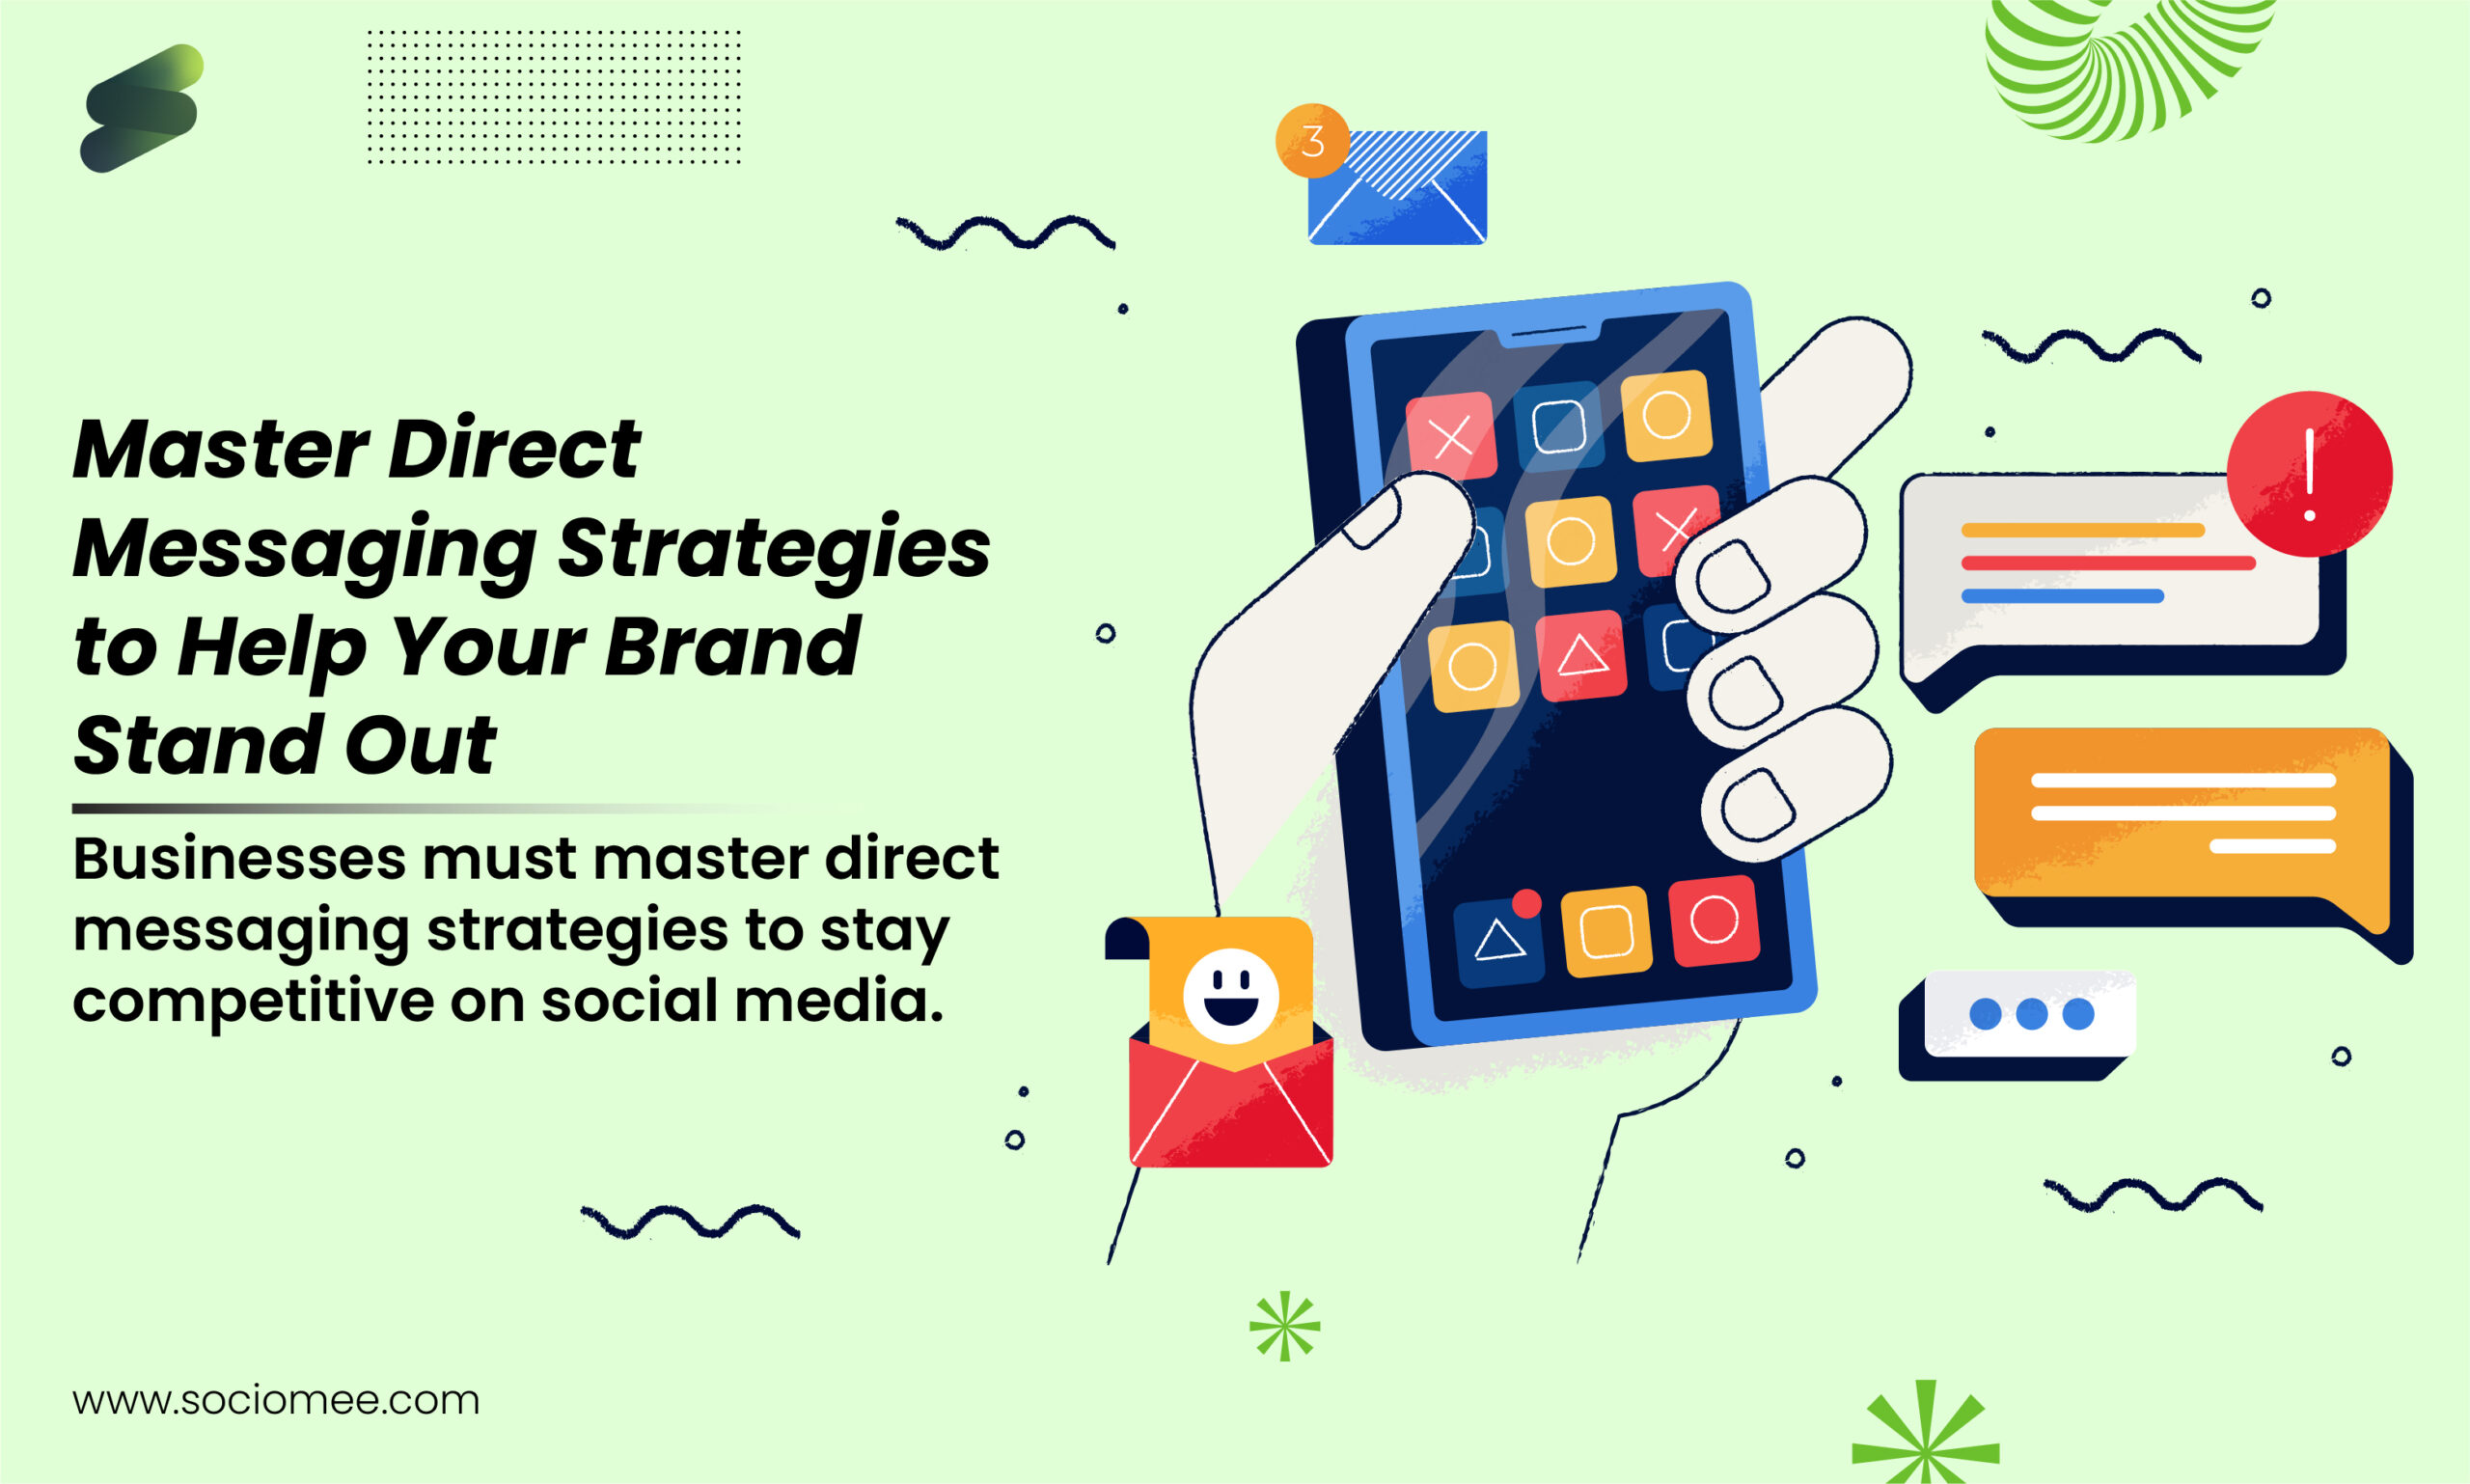 How to Master Direct Messaging Strategies to Help Your Brand Stand Out